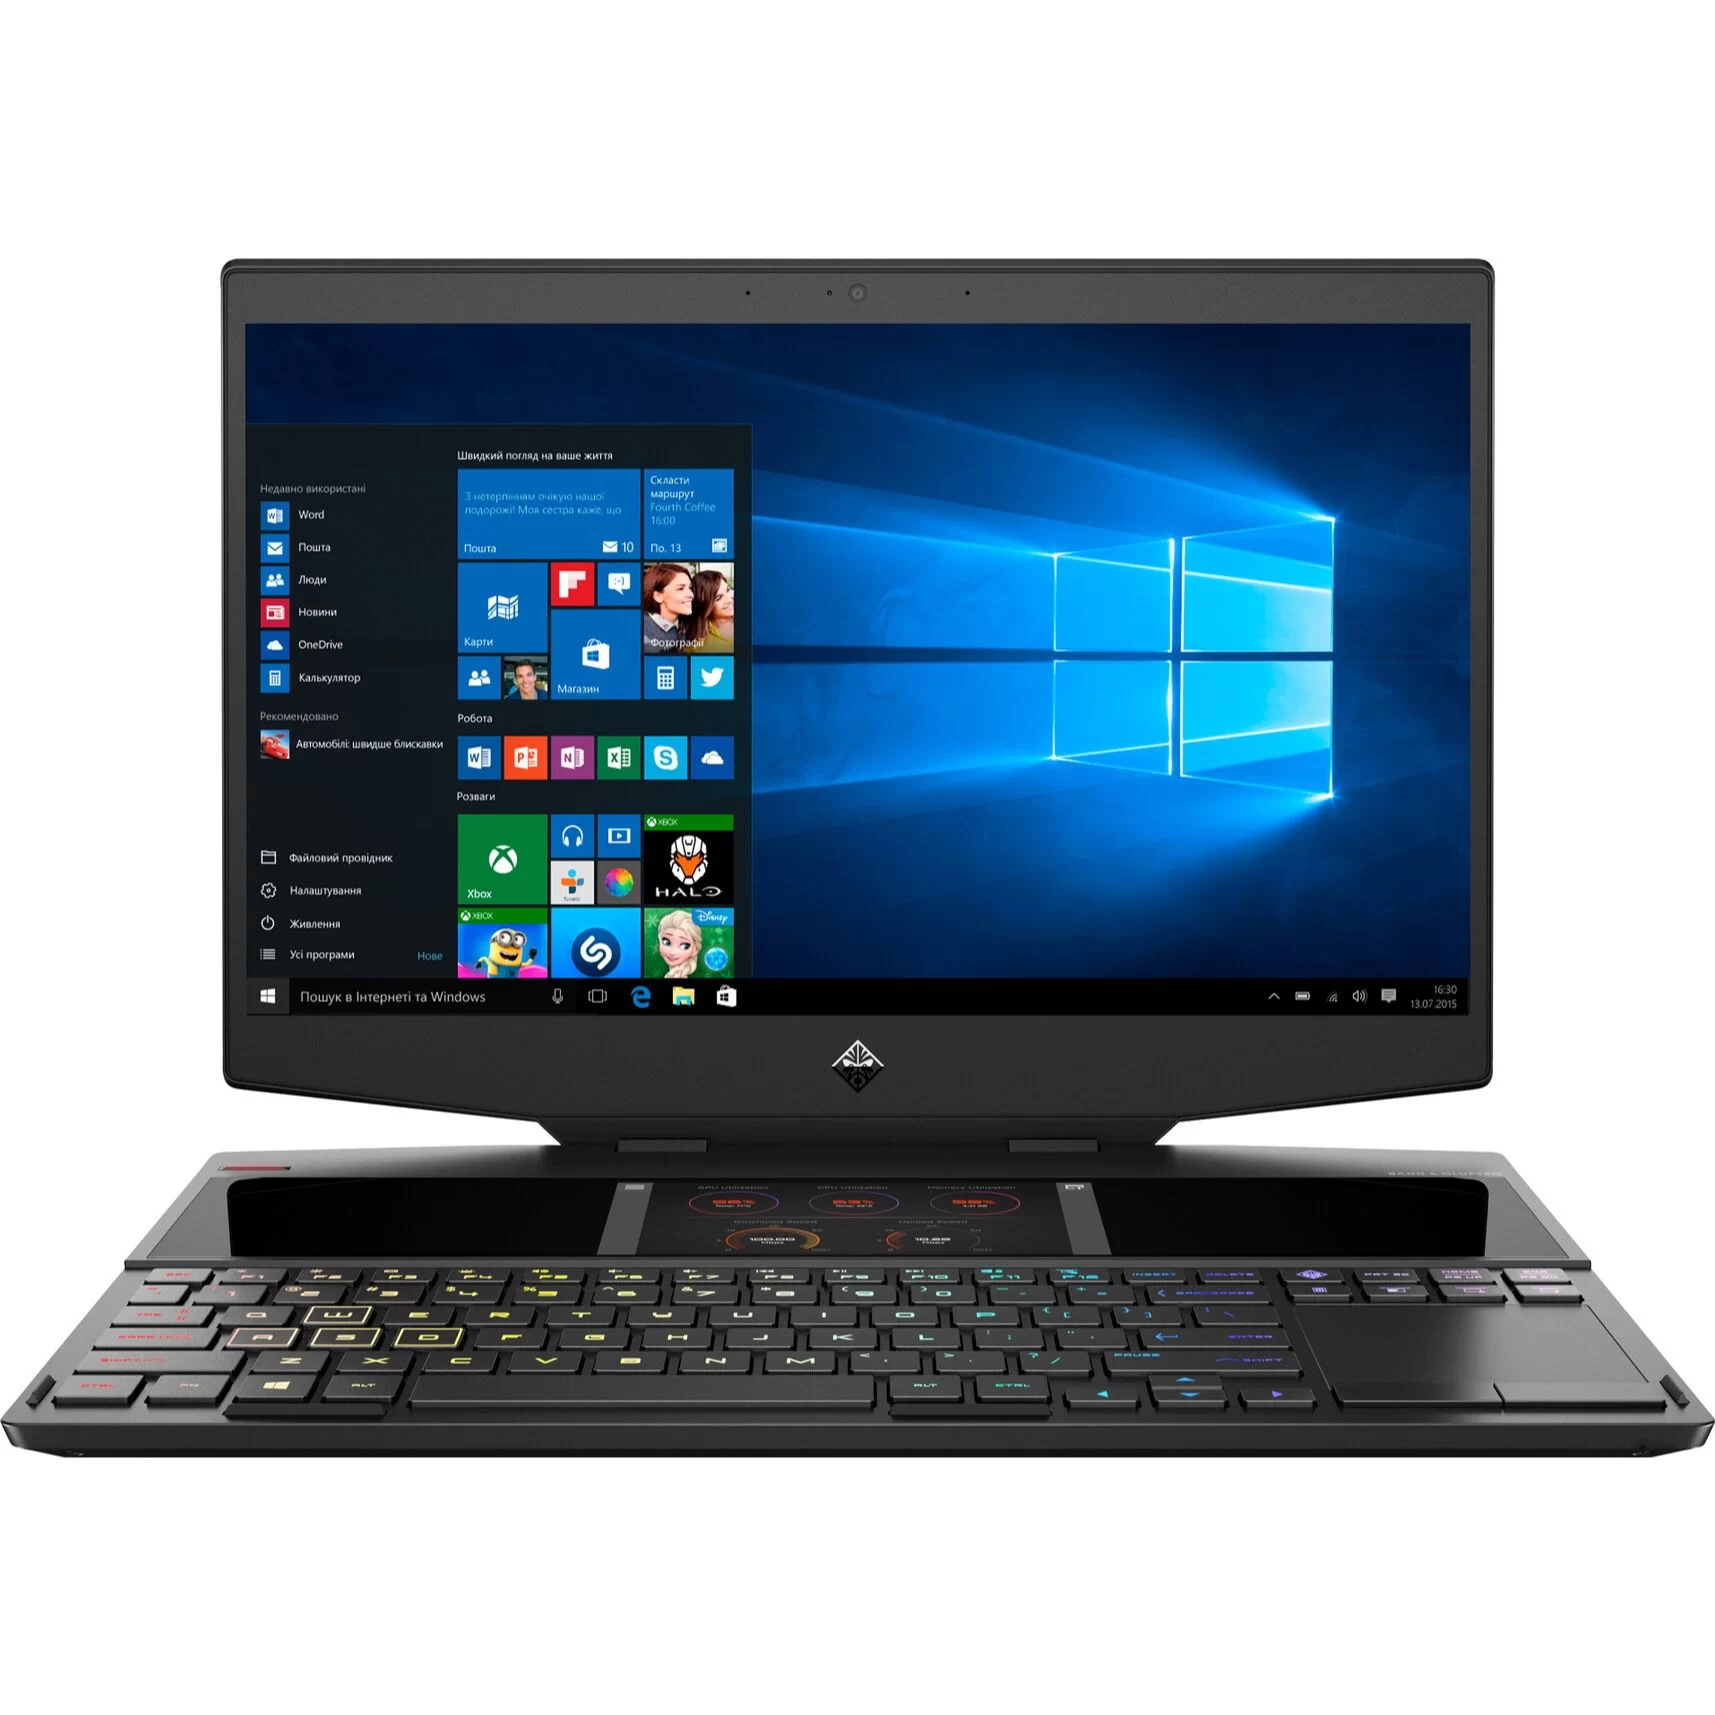 HP OMEN 15T-DG000 X 2S, i7-9750H, 15.6 inch FHD and 5.98 inch touchscreen, 16GB, 512GB Nvme, RTX 2080, Windows 10 Gaming Gaming 8